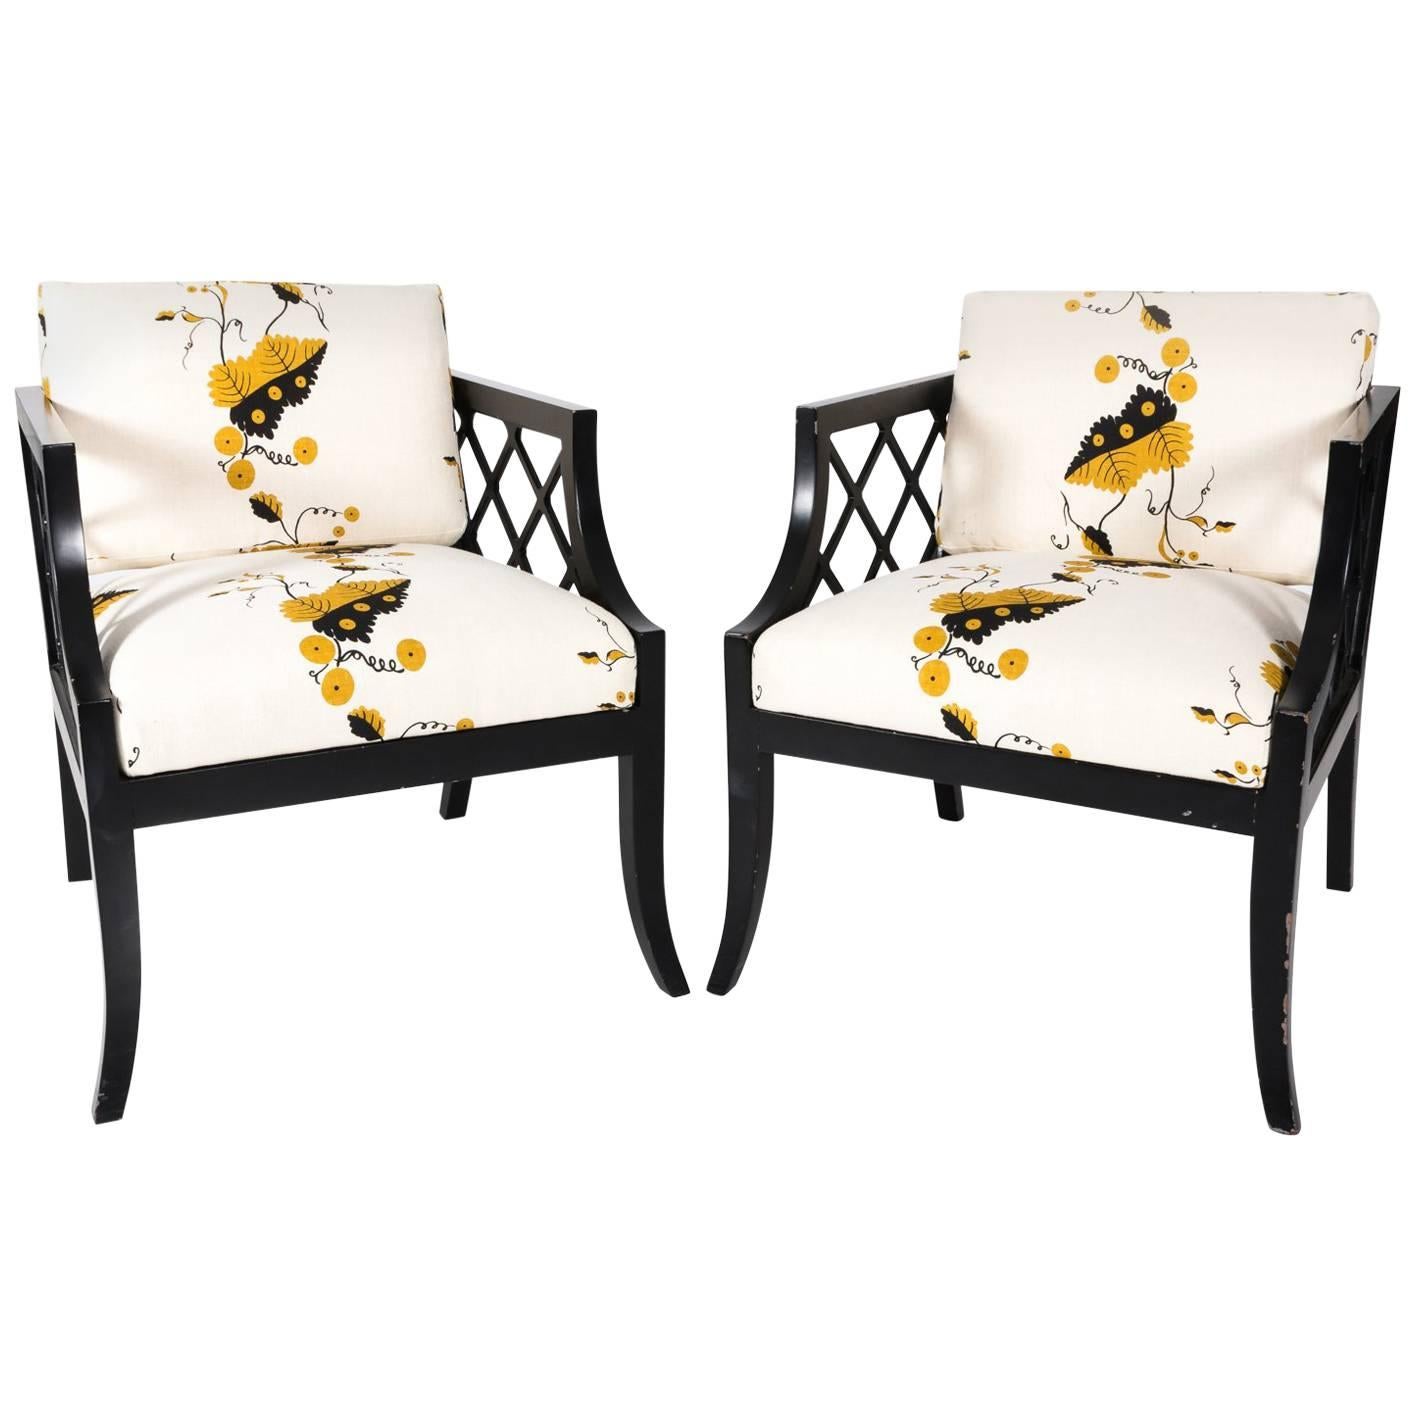 Mid-20th Century Chinoiserie Style Armchairs